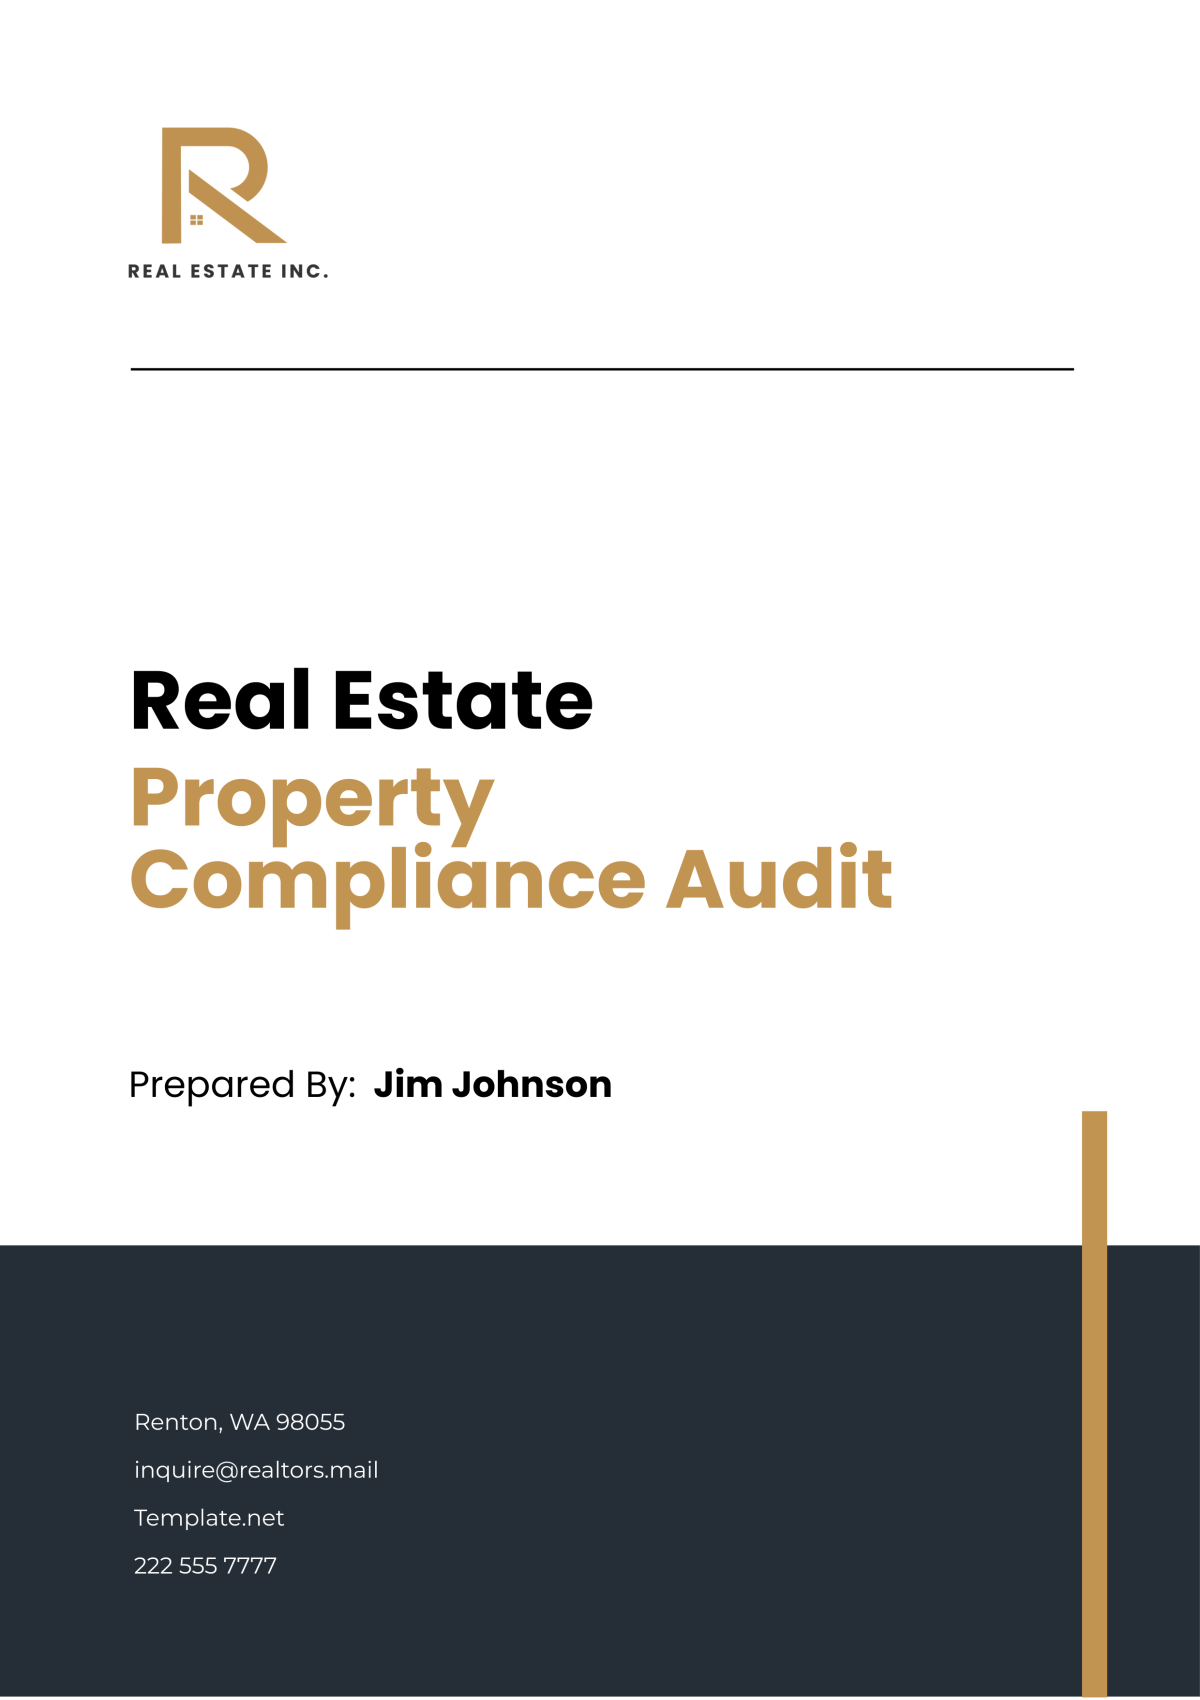 Real Estate Property Compliance Audit Template